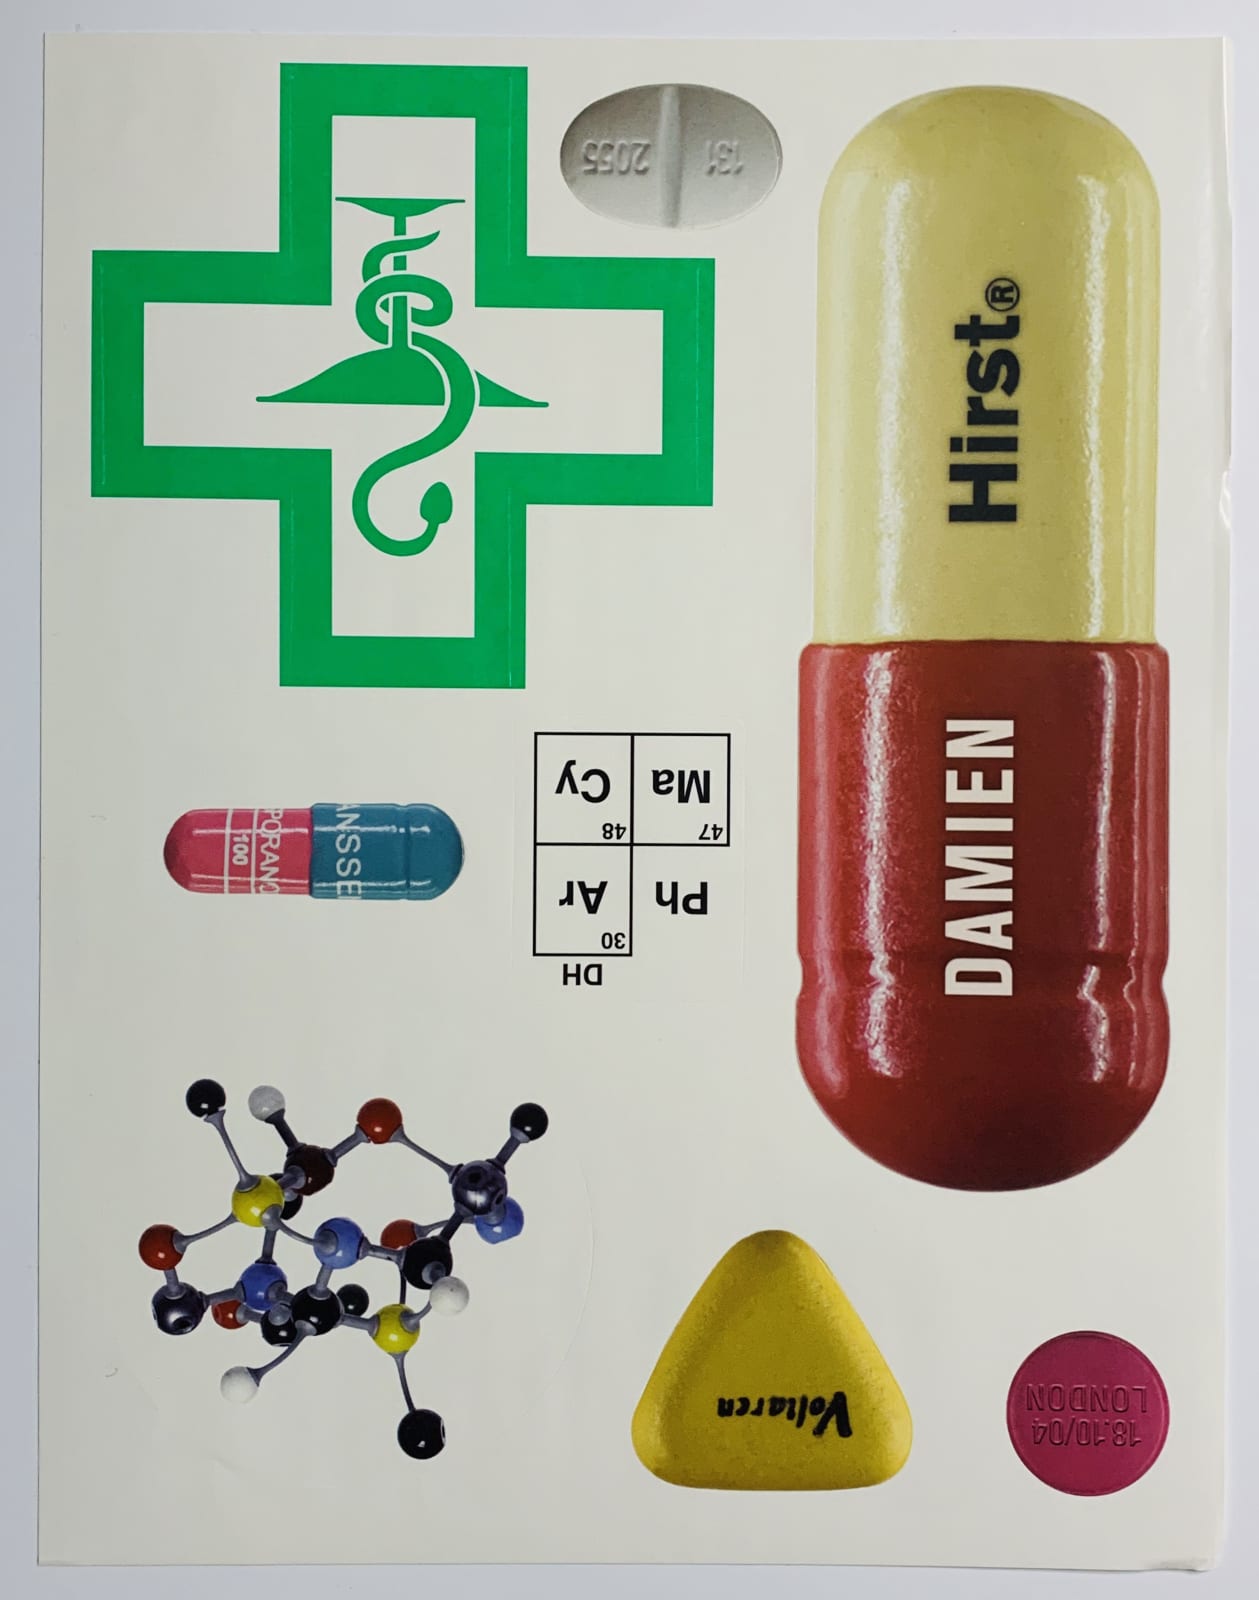 Damien Hirst, Damien Hirst's Pharmacy (Sotheby's auction catalogue